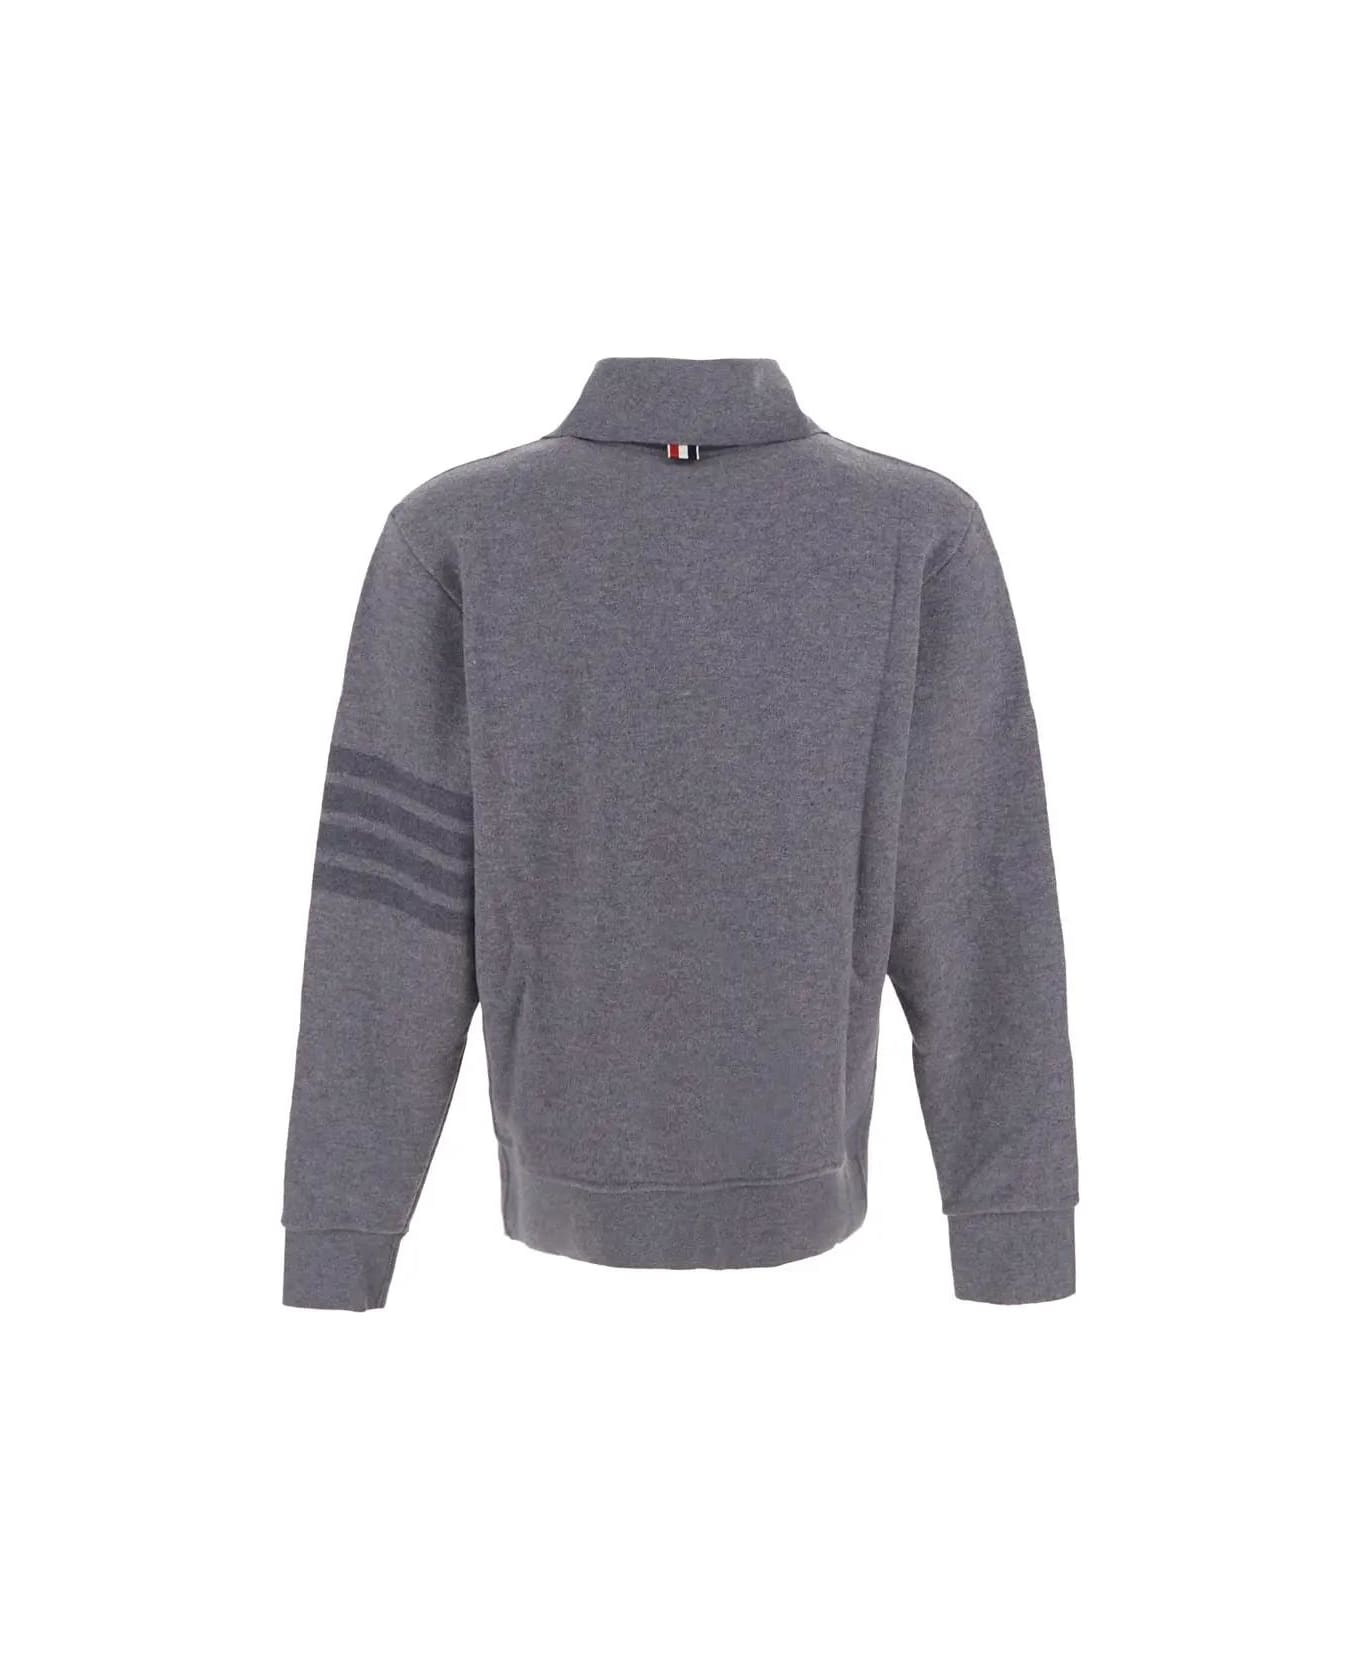 Thom Browne Funnel Neck Pullover - Grey